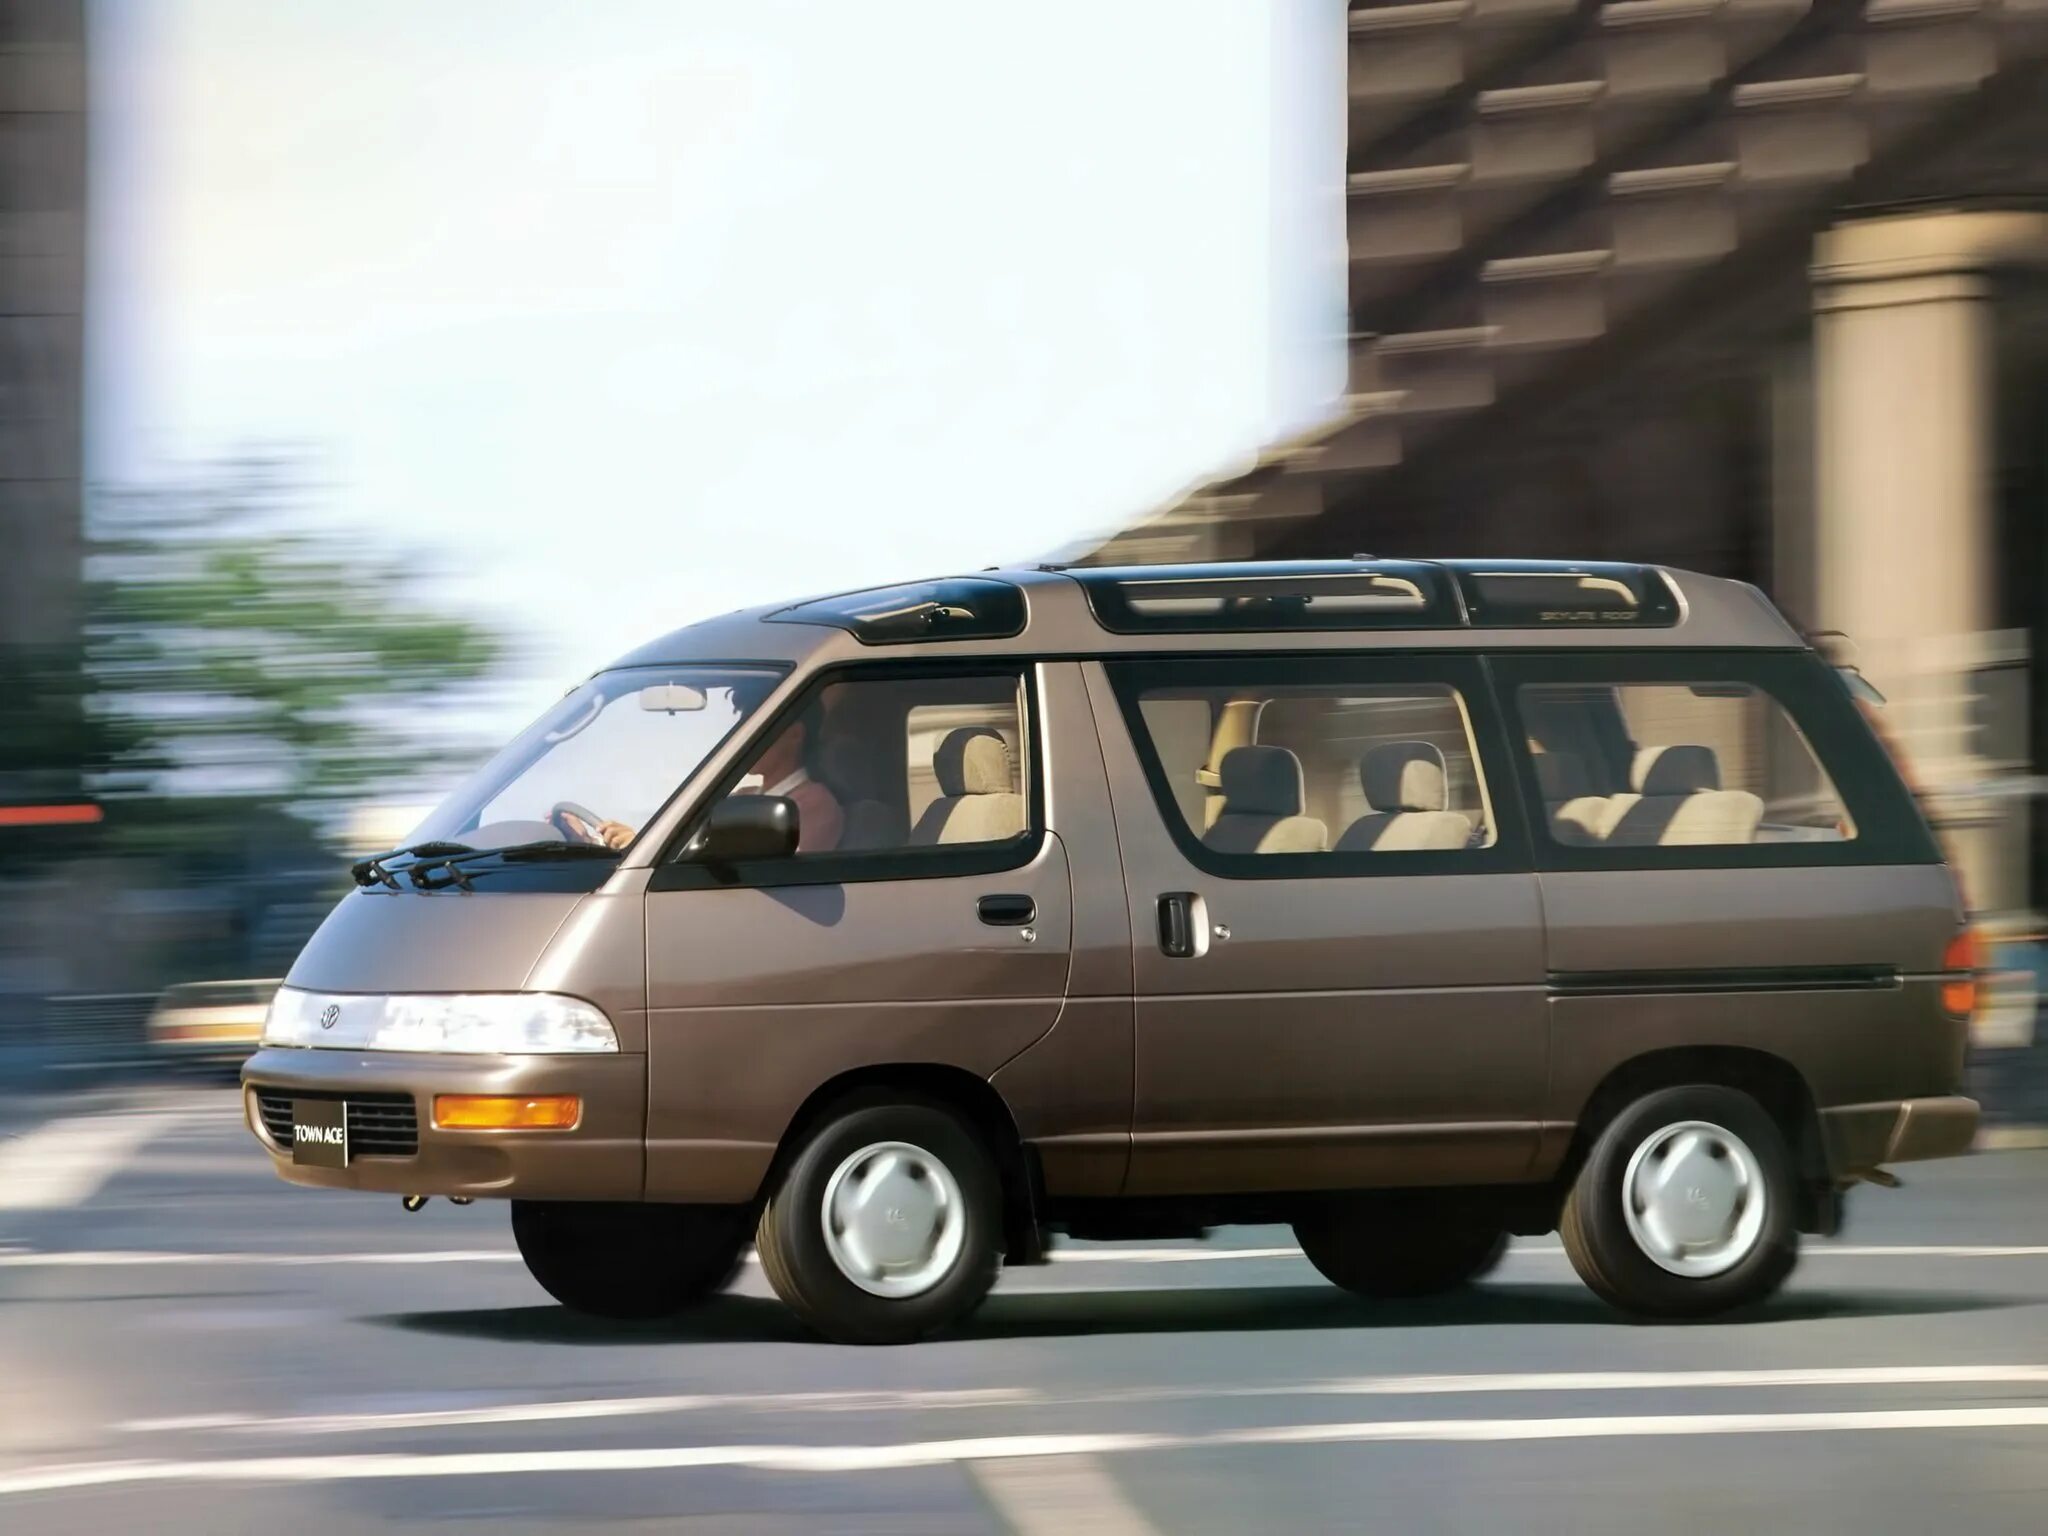 Toyota Town Ace. Тойота Town Ace 1996. Toyota Town Ace 1992-1996. Тойота Таун айс 1994. Таун айс фото